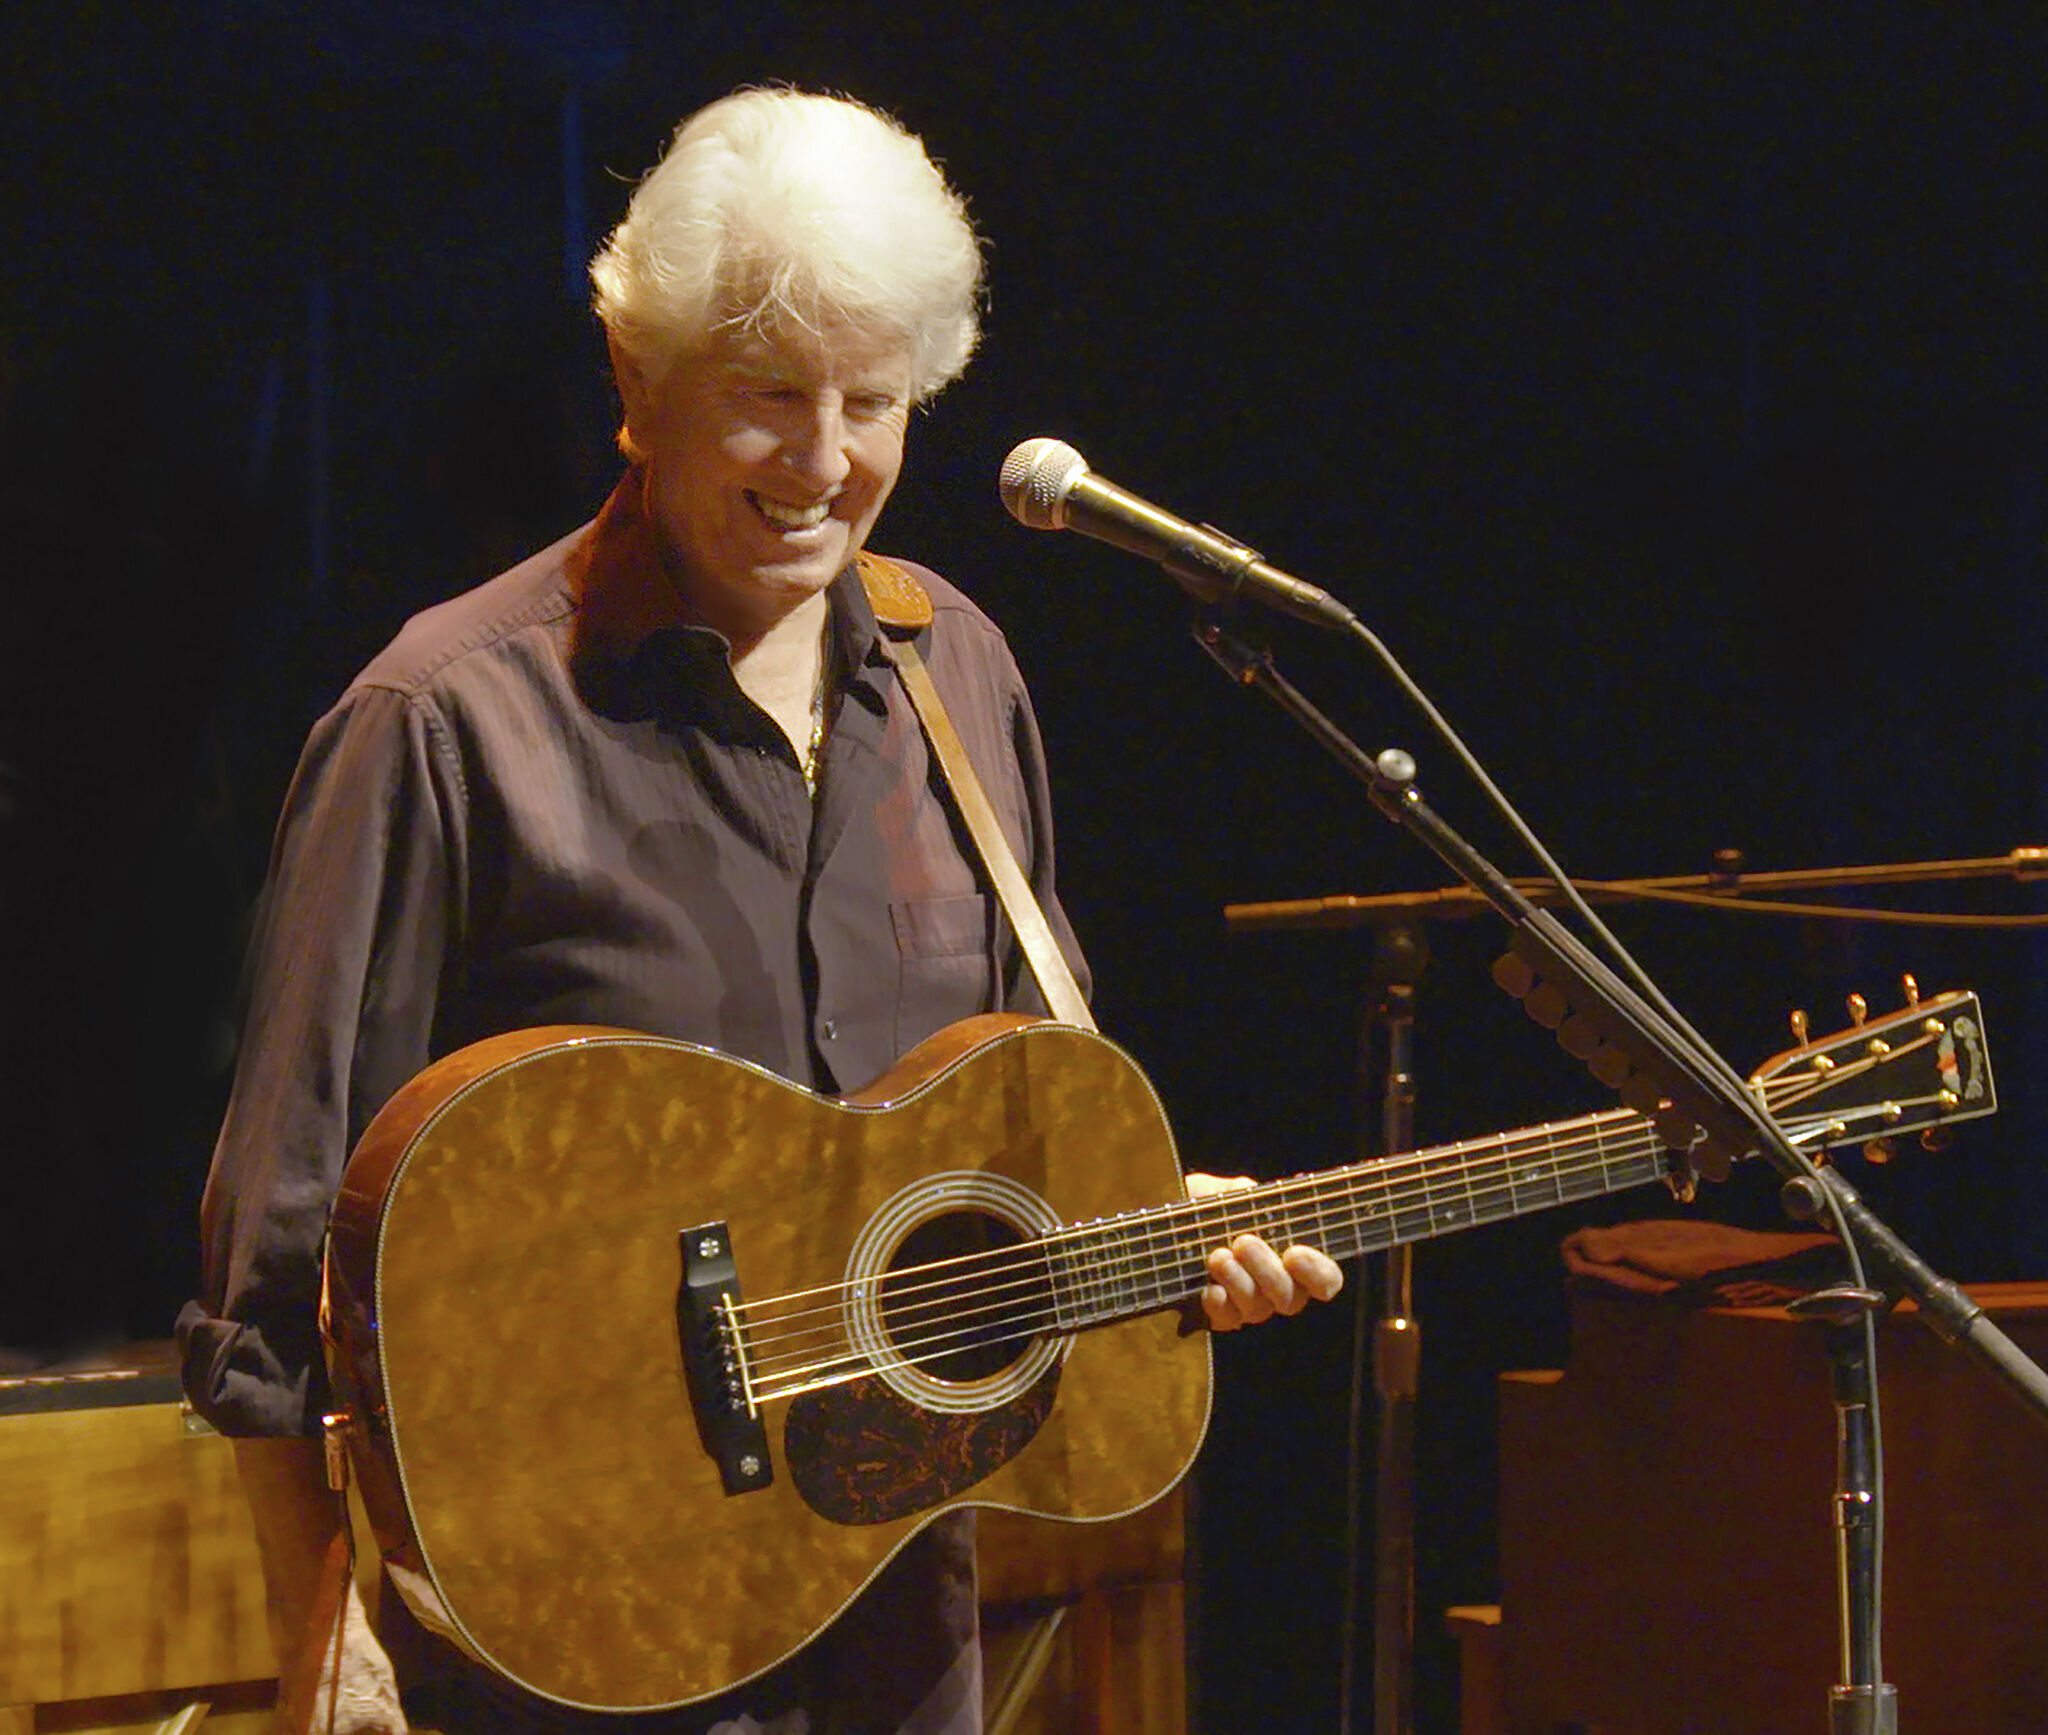 Graham Nash Has a Few More Songs Before He Goes - The New York Times